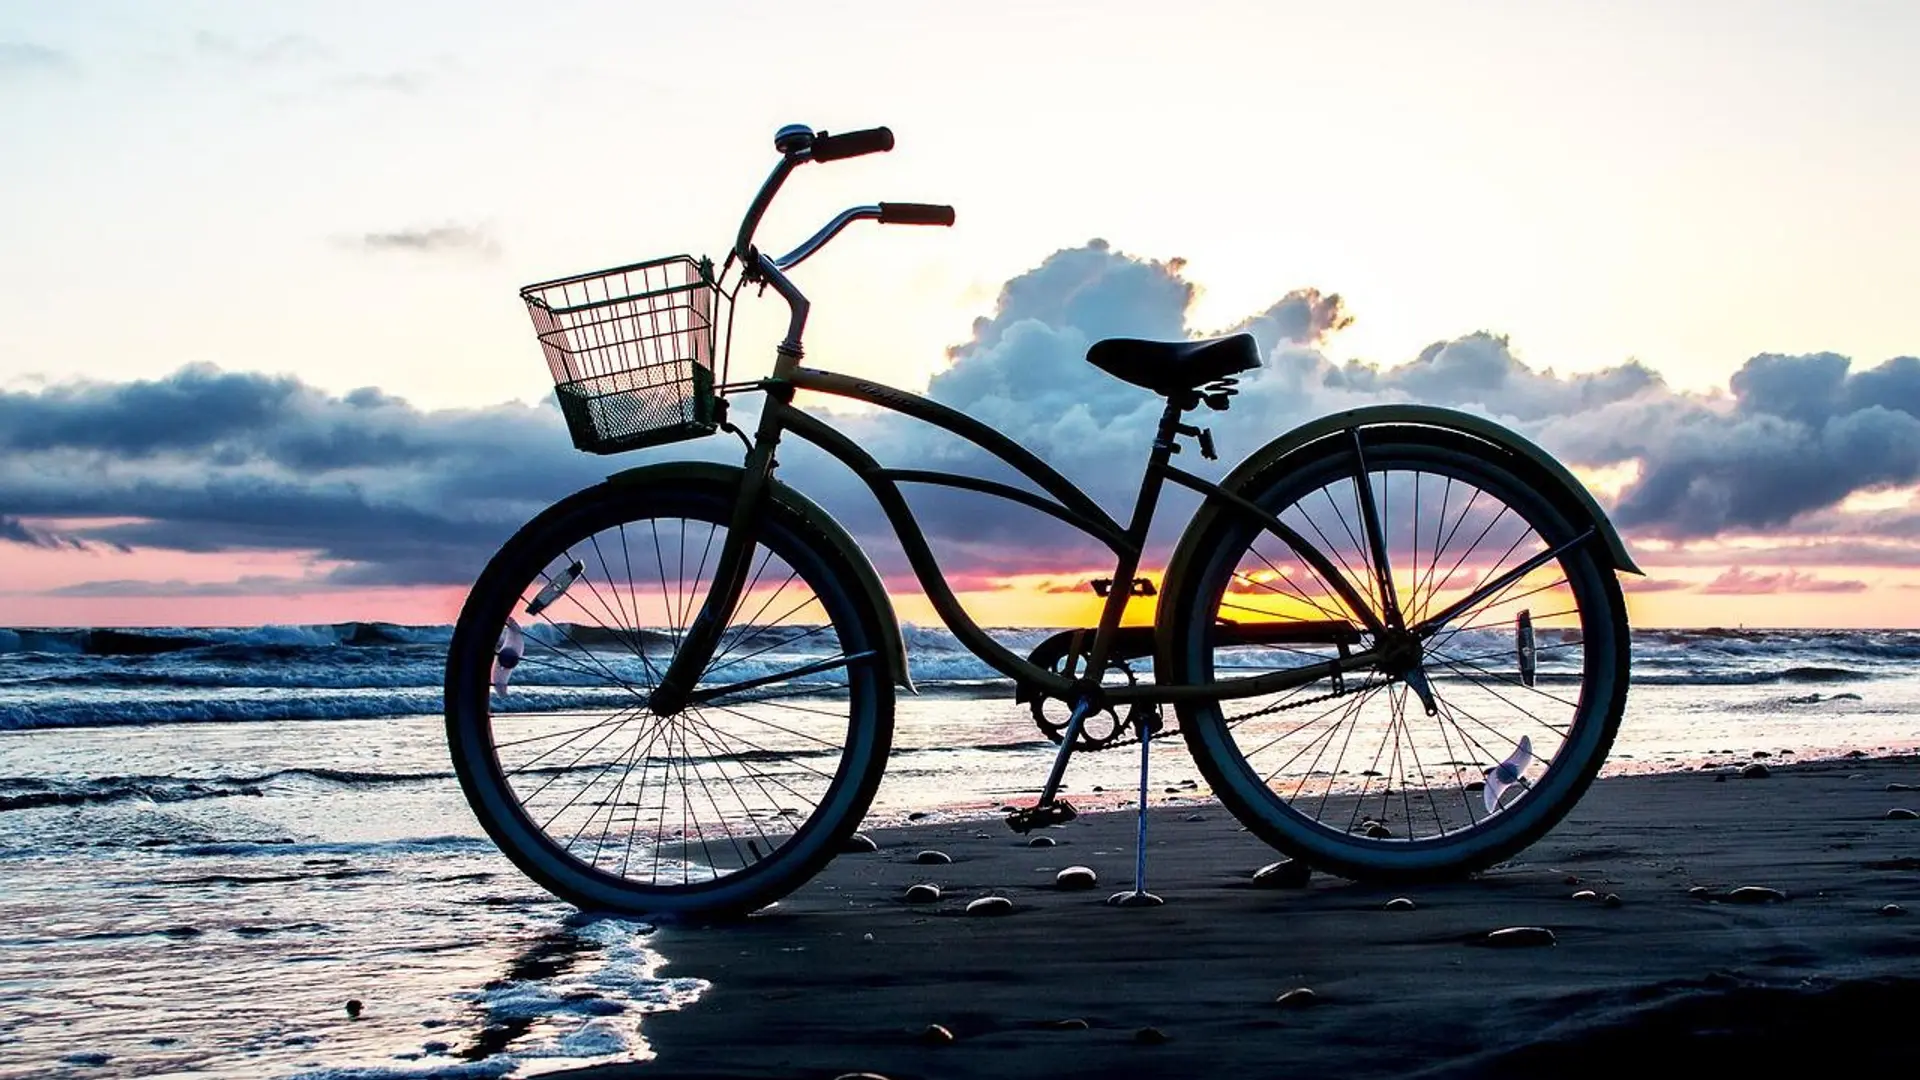 a cycle at the beach